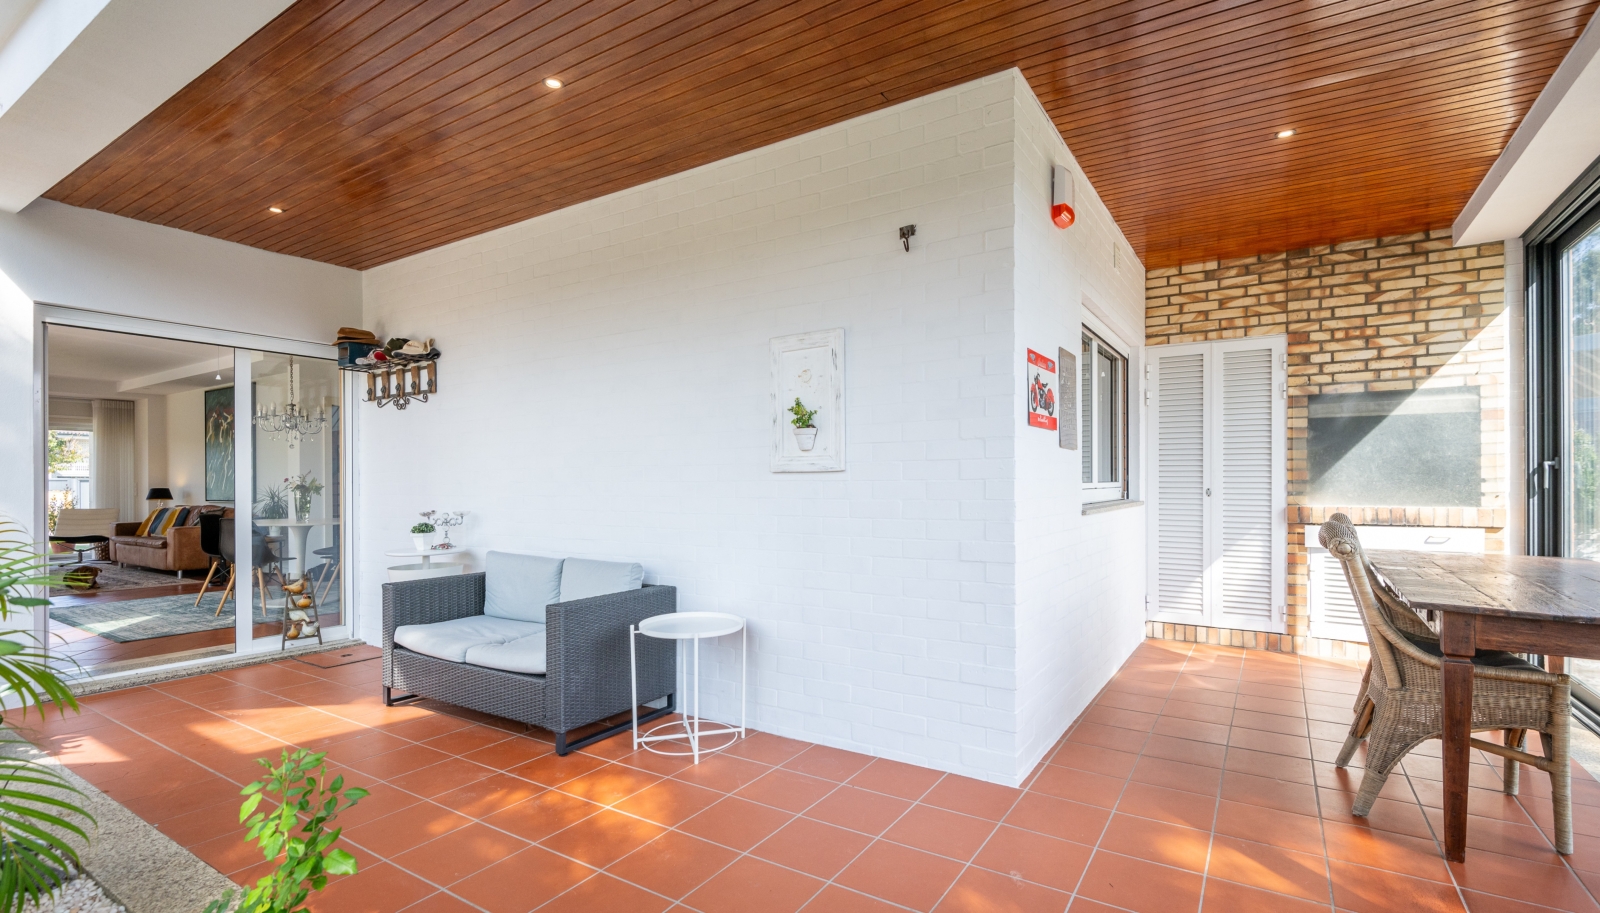 Four-bedroom house with pool for sale - Furadouro - Ovar - Portugal_240483